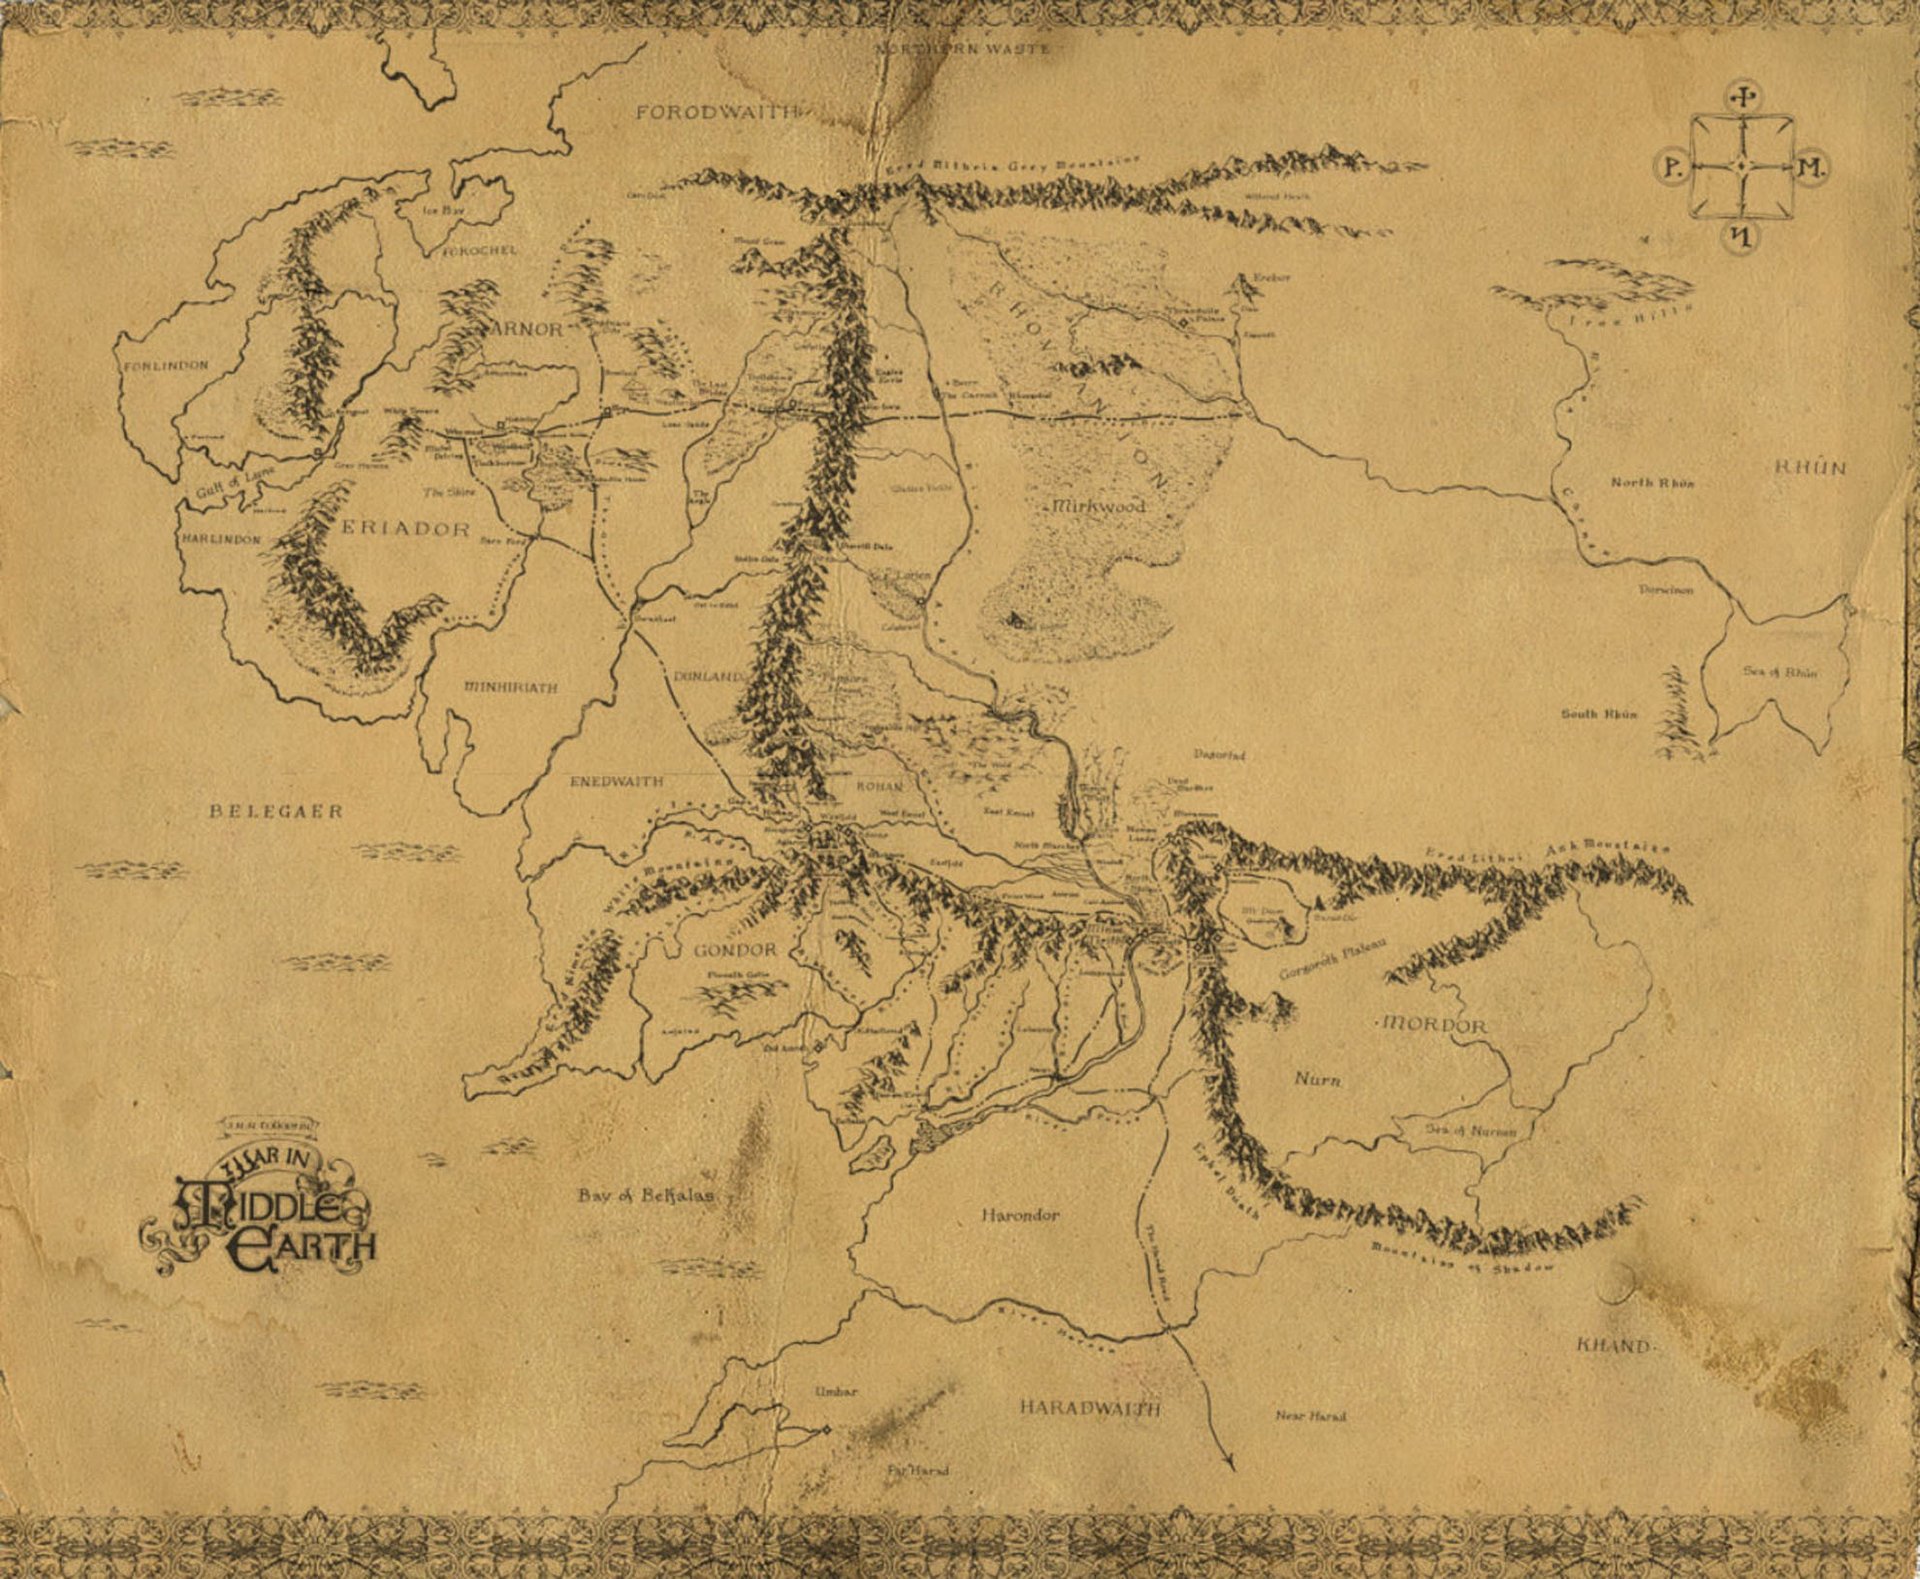 a map from the Lord of the Rings saga